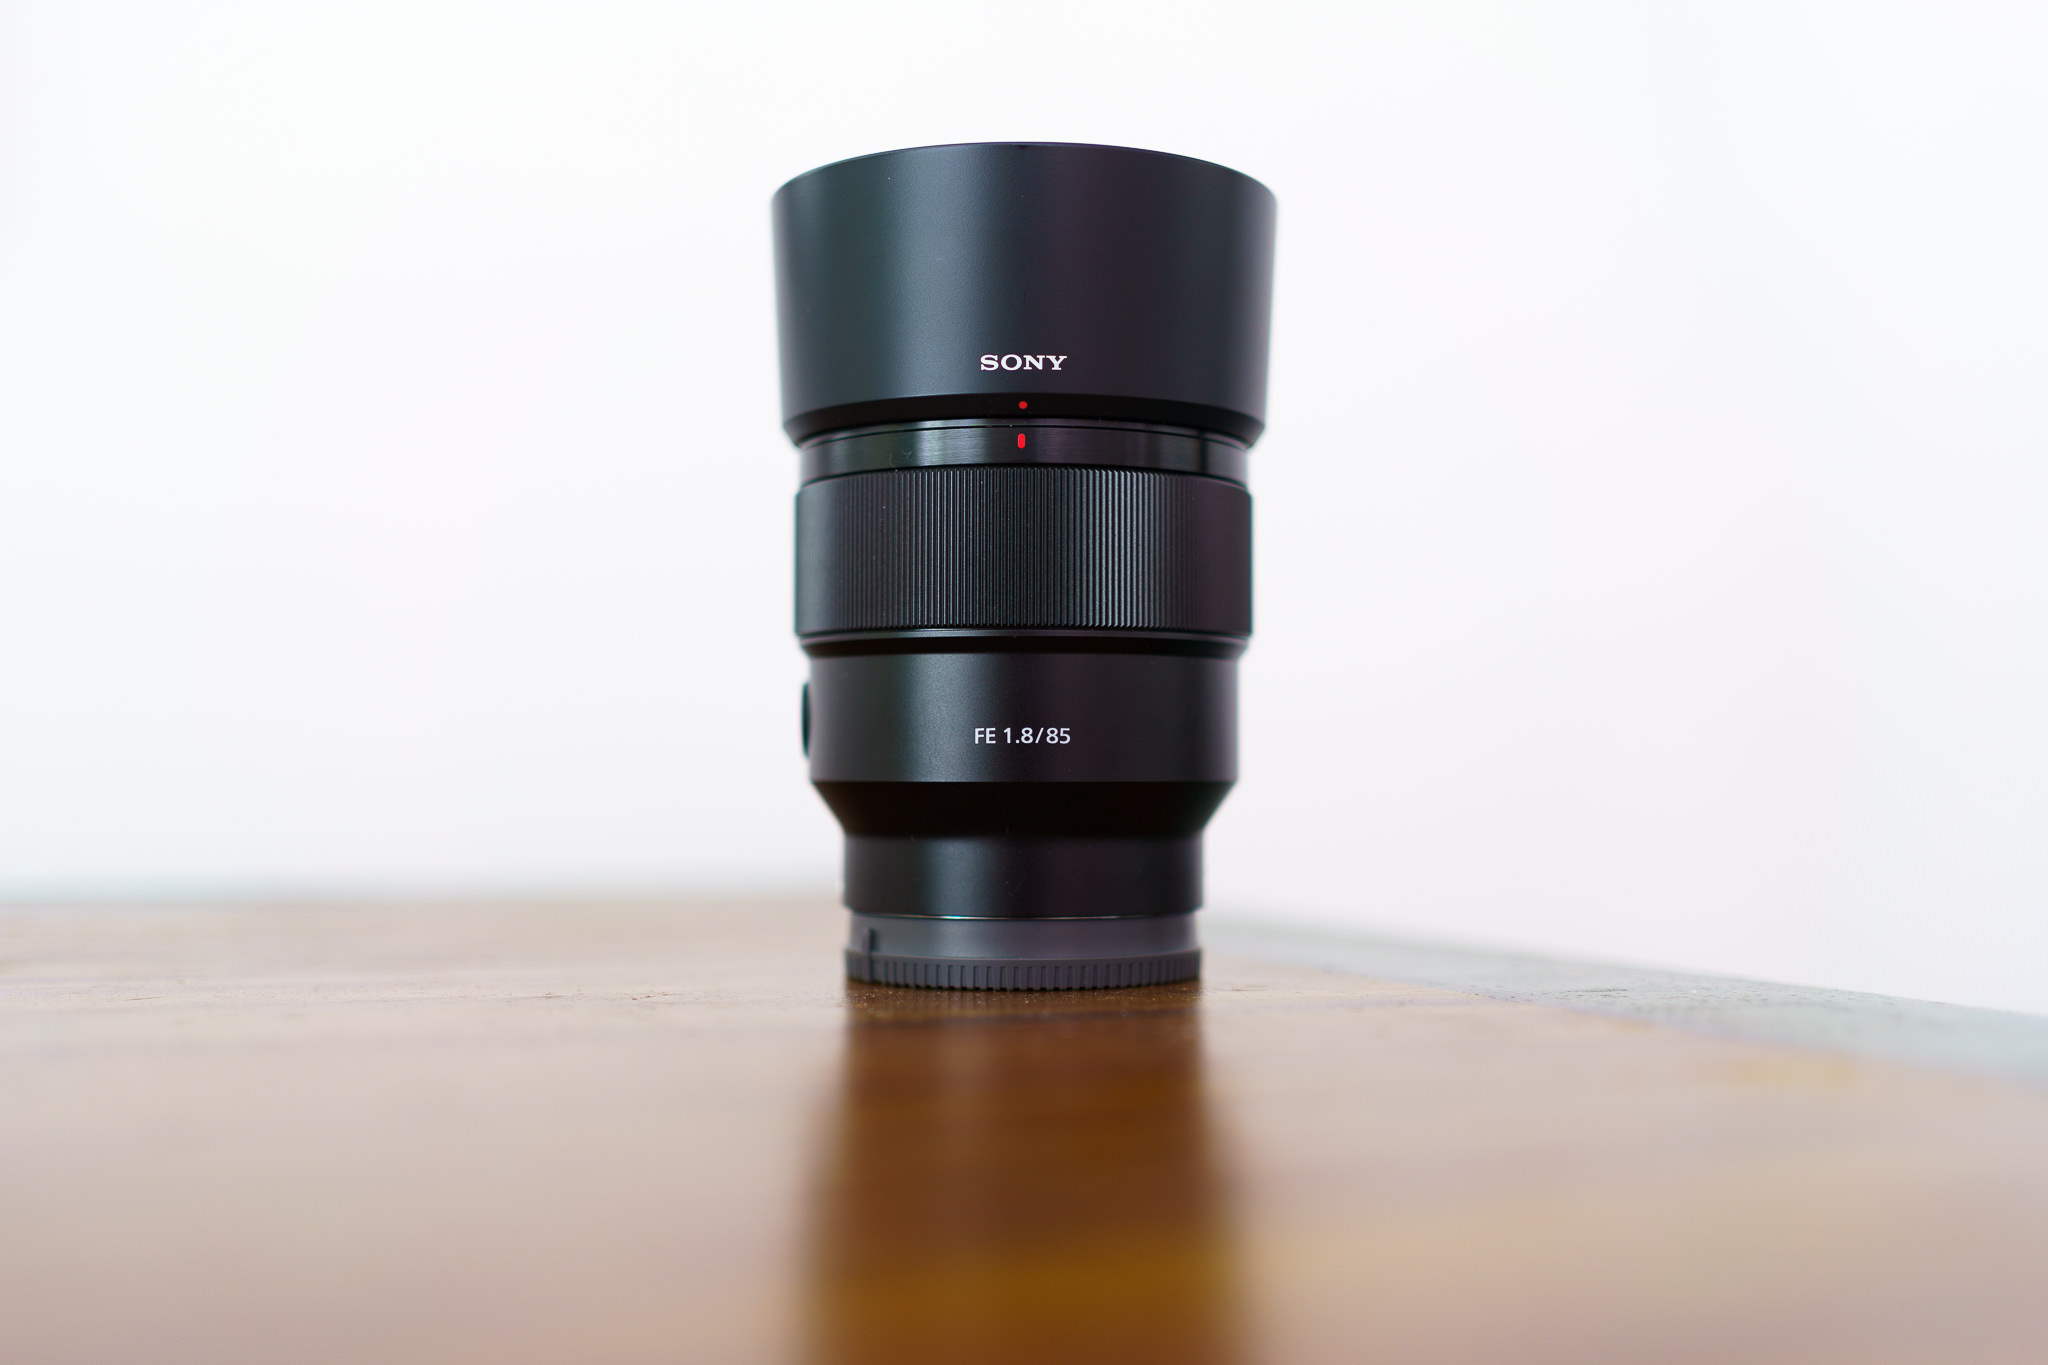 The Sony FE 1.8/85mm